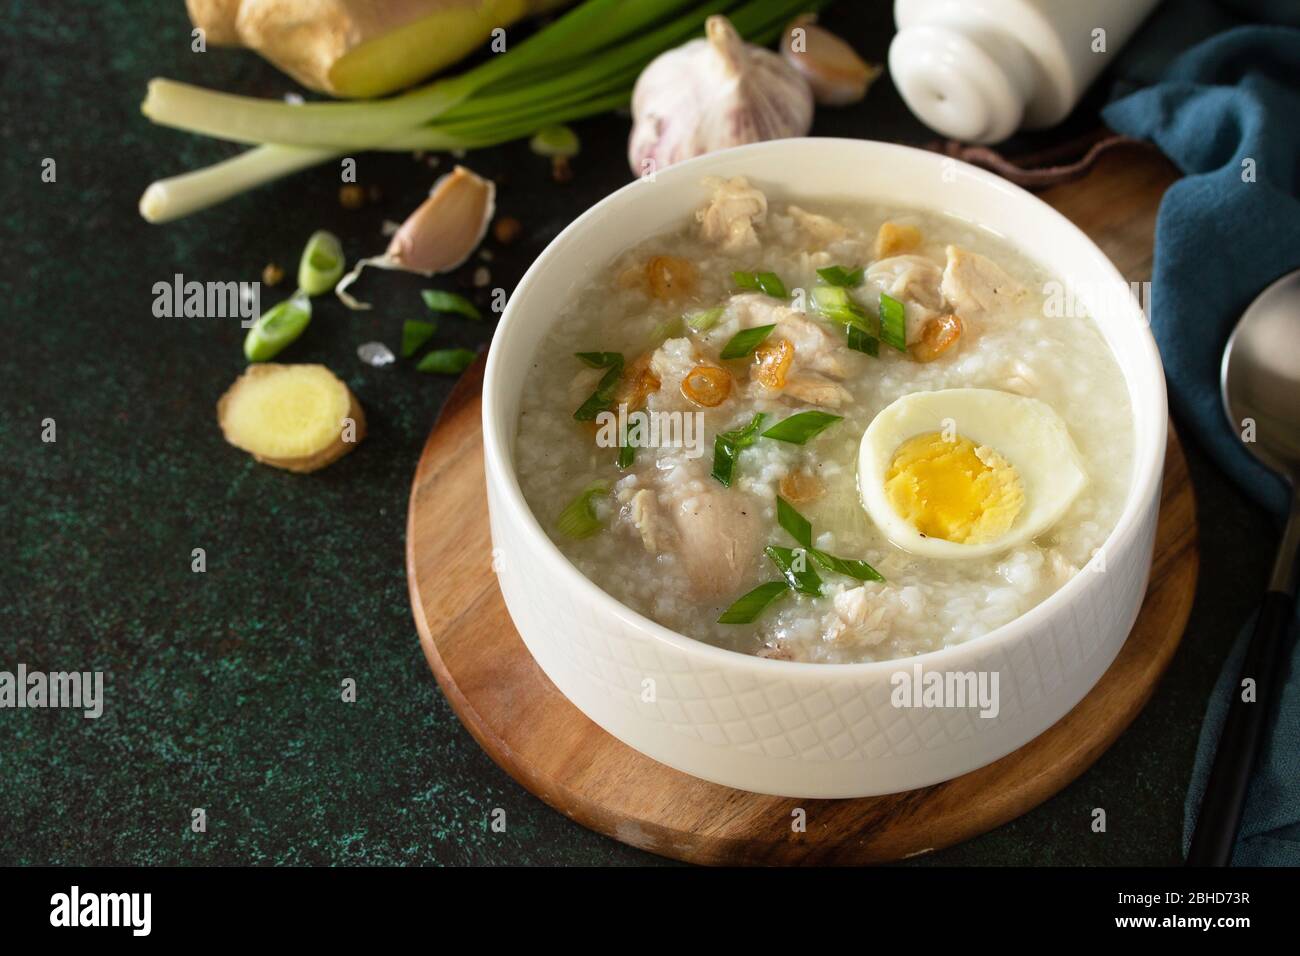 Arroz Caldo Soup. Hot soup with ginger chicken rice and garlic in a bowl on a dark countertop. Copy space. Stock Photo